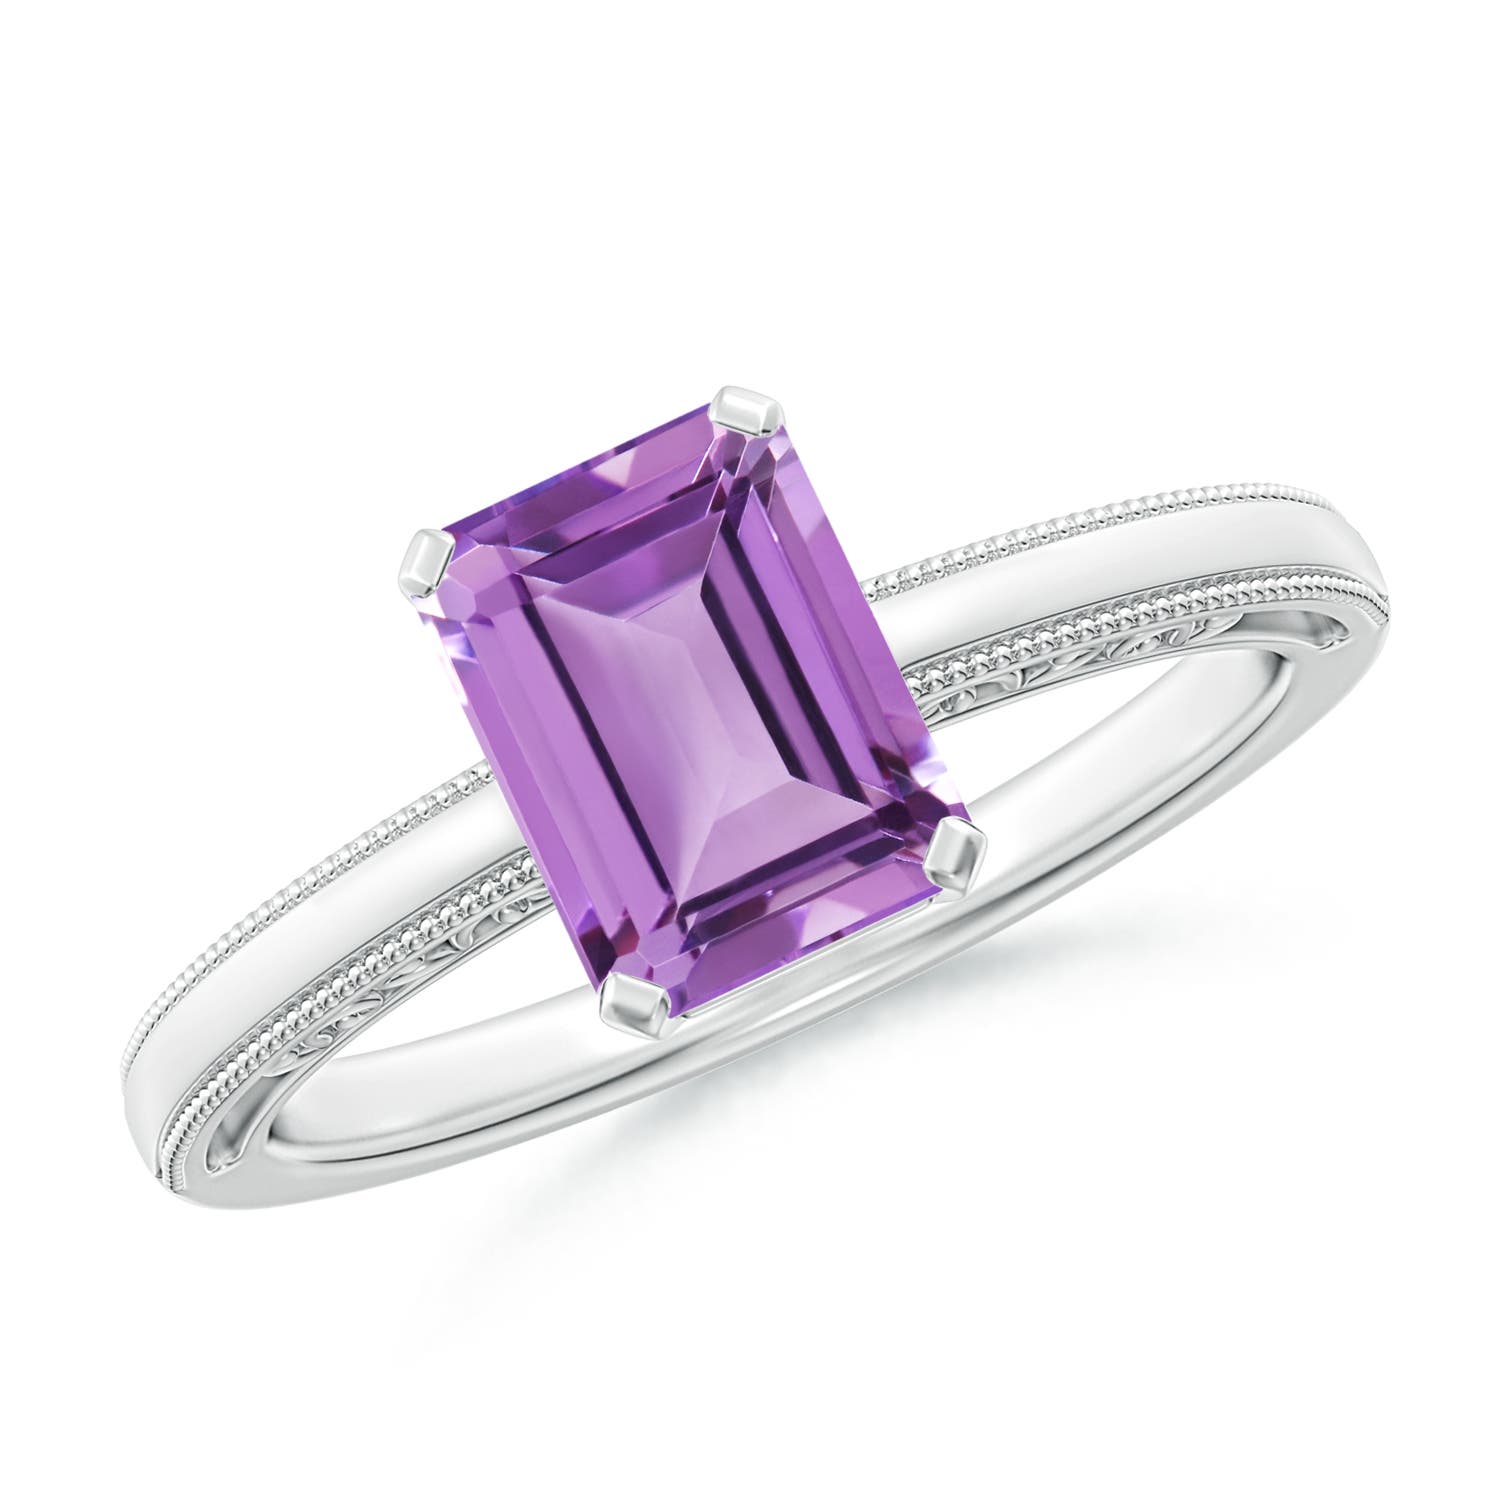 A - Amethyst / 1.5 CT / 14 KT White Gold